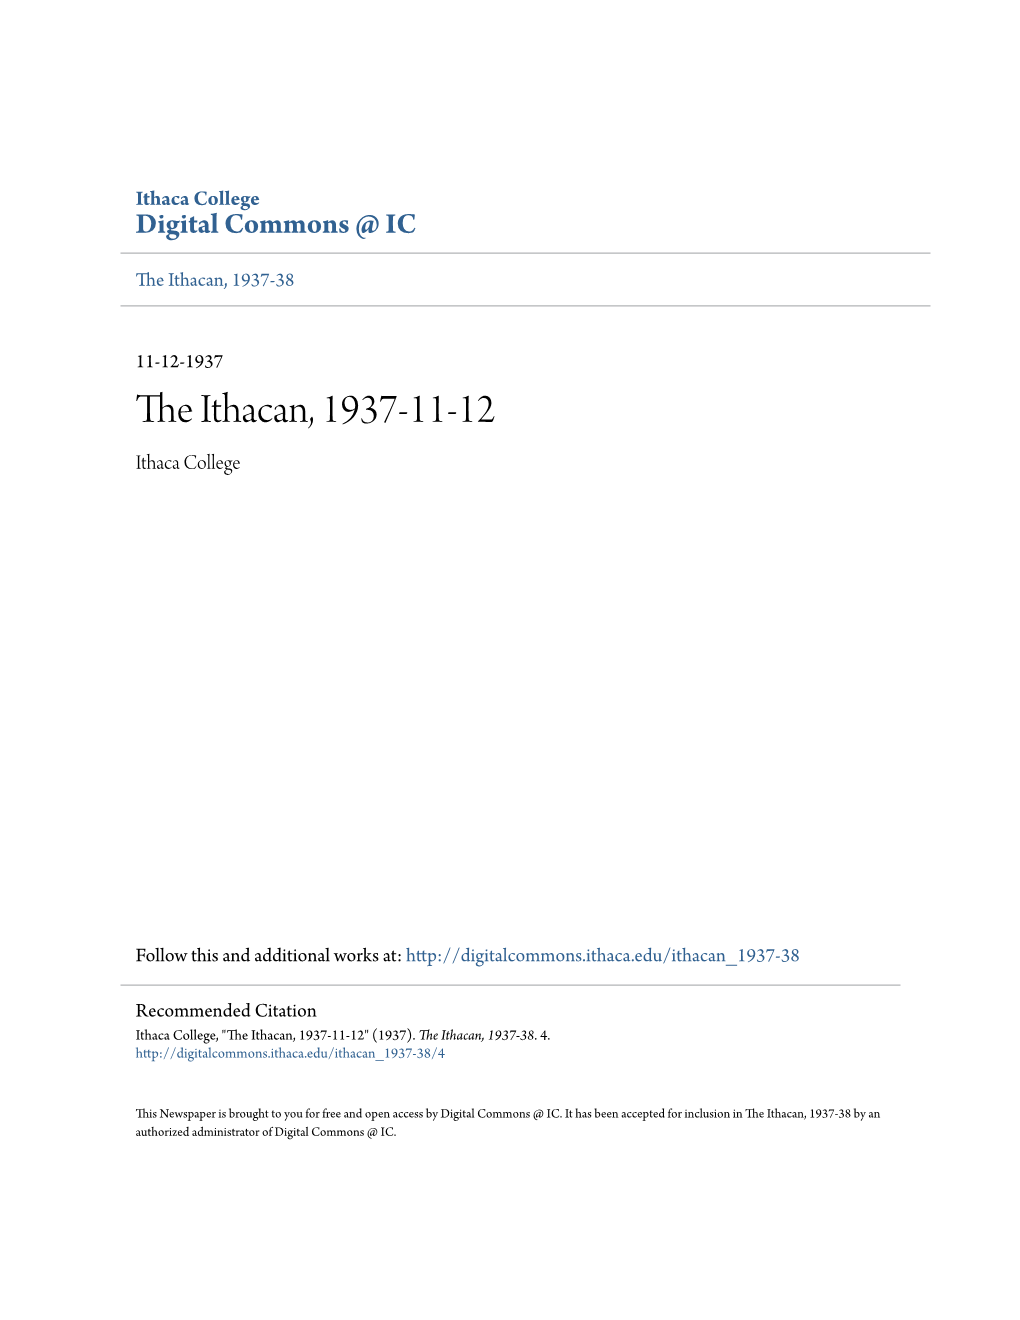 The Ithacan, 1937-11-12